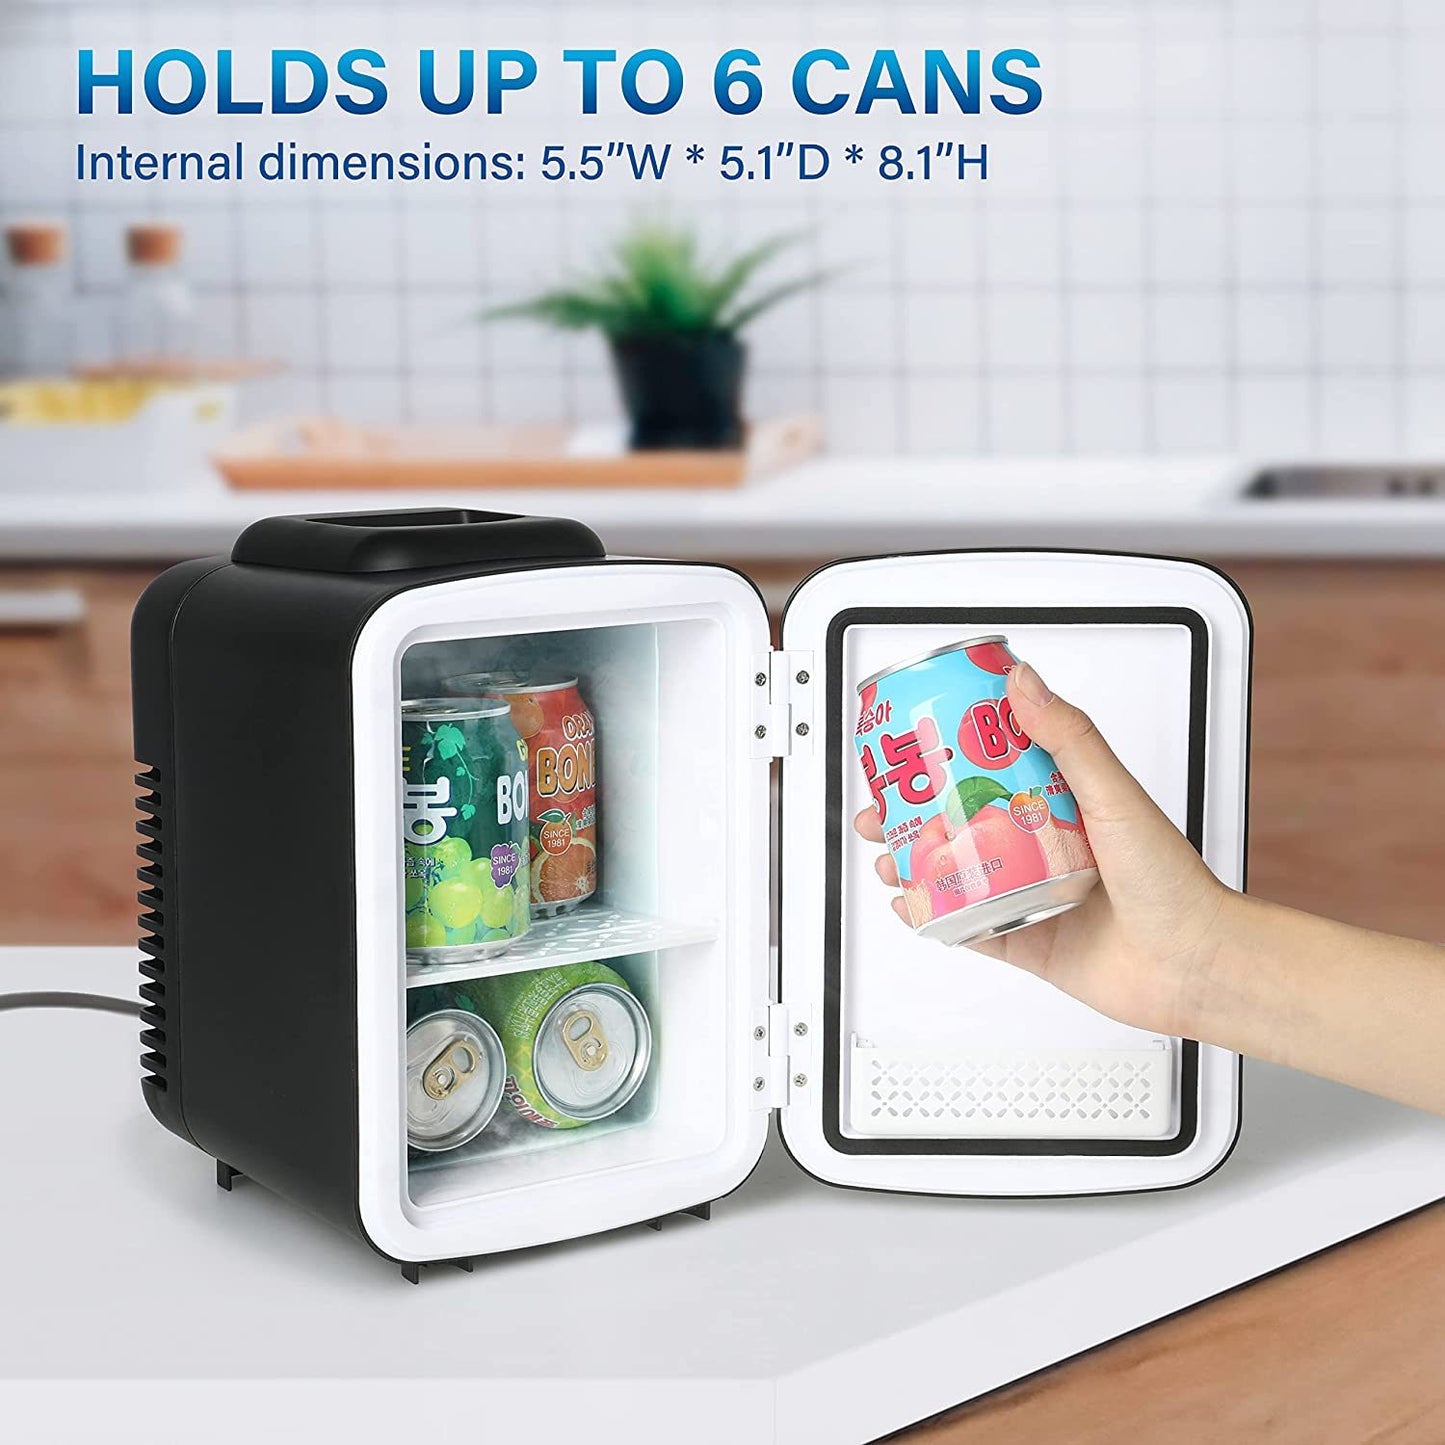 Simple Deluxe Mini Fridge: Compact Portable Cooler & Warmer for Skincare, Beverages, Food, and Cosmetics - lolaluxeshop